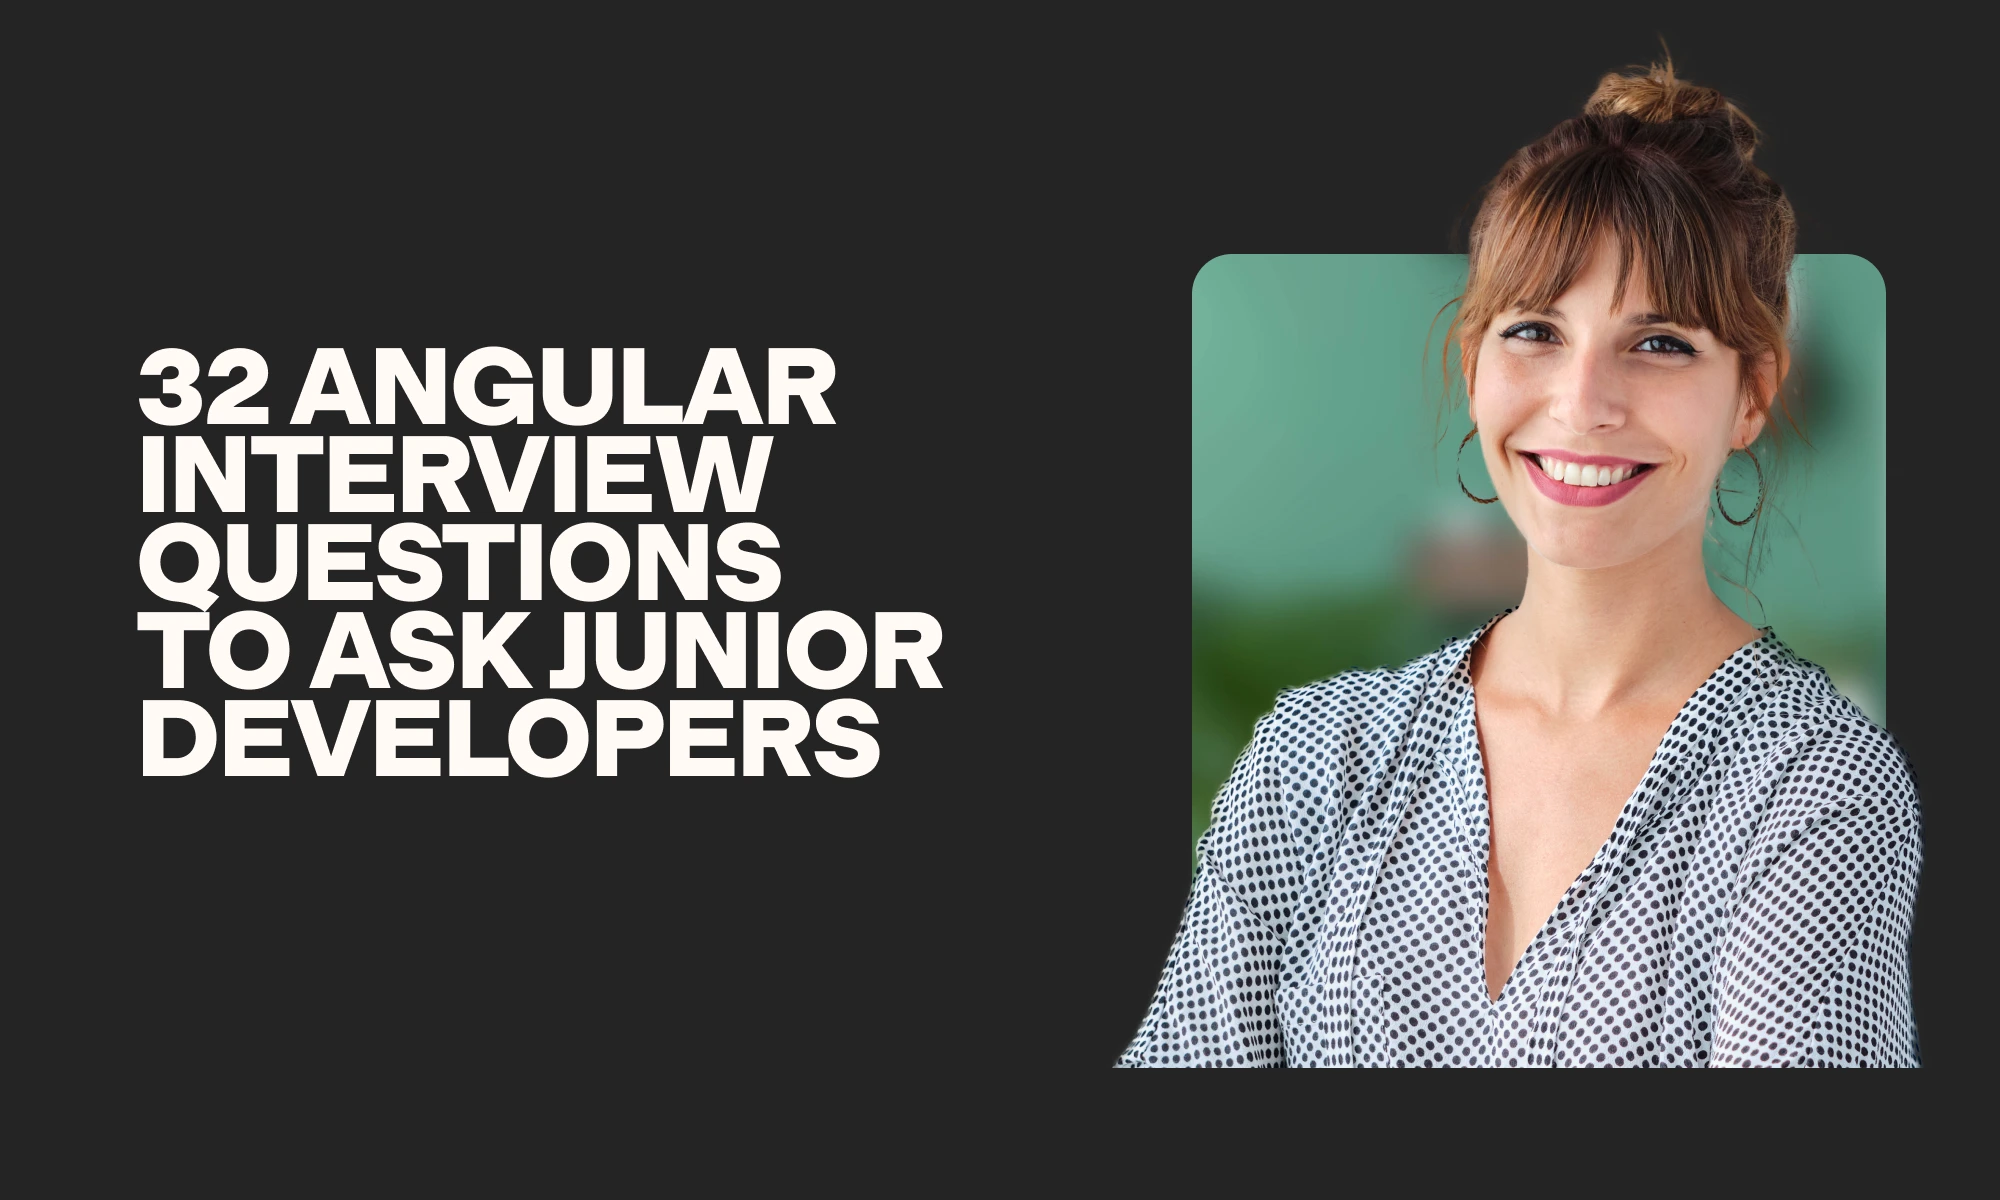 32 Angular interview questions to ask junior developers